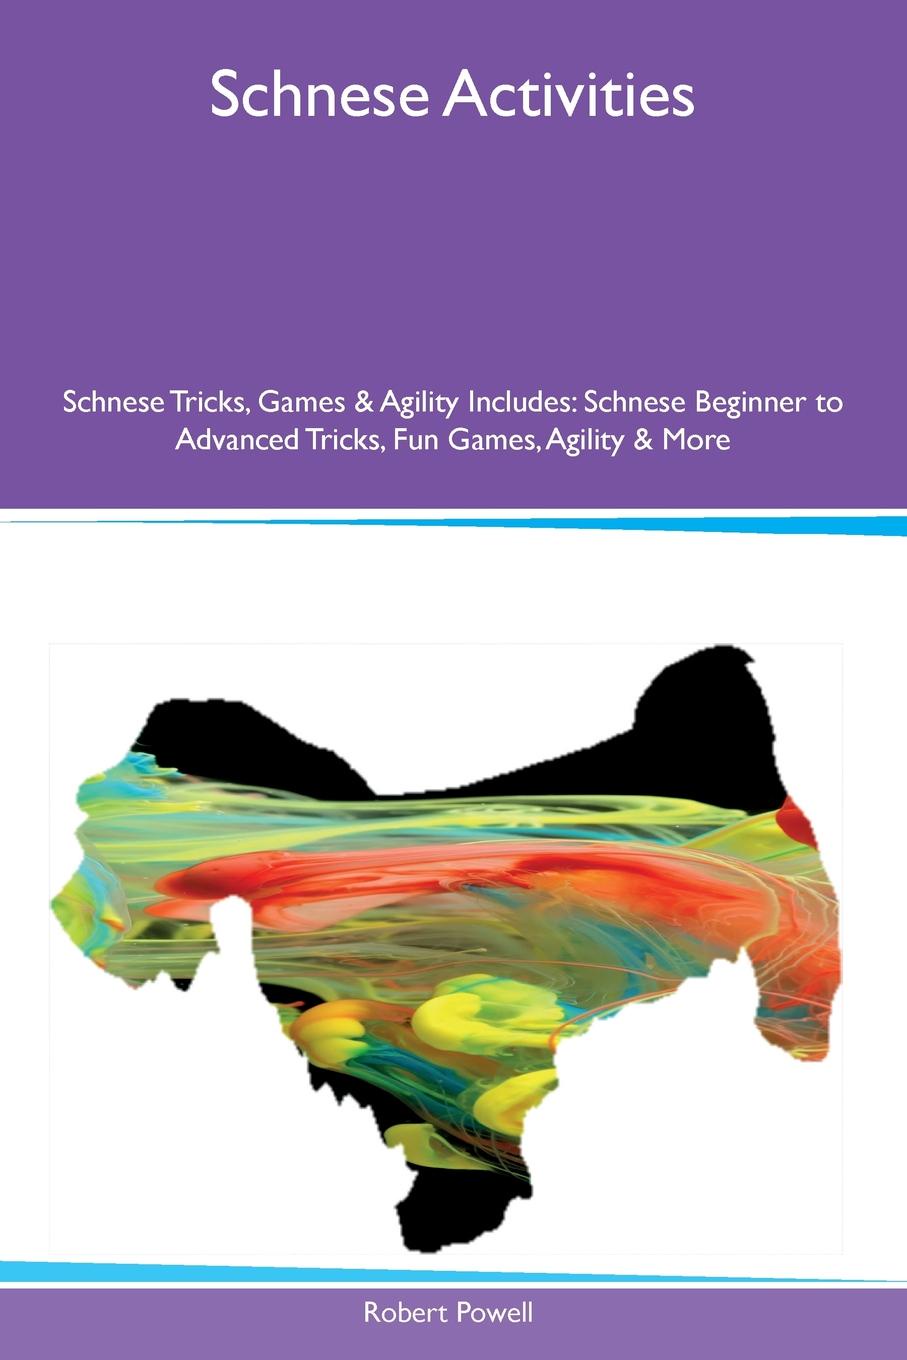 Schnese Activities Schnese Tricks, Games & Agility Includes. Schnese Beginner to Advanced Tricks, Fun Games, Agility & More